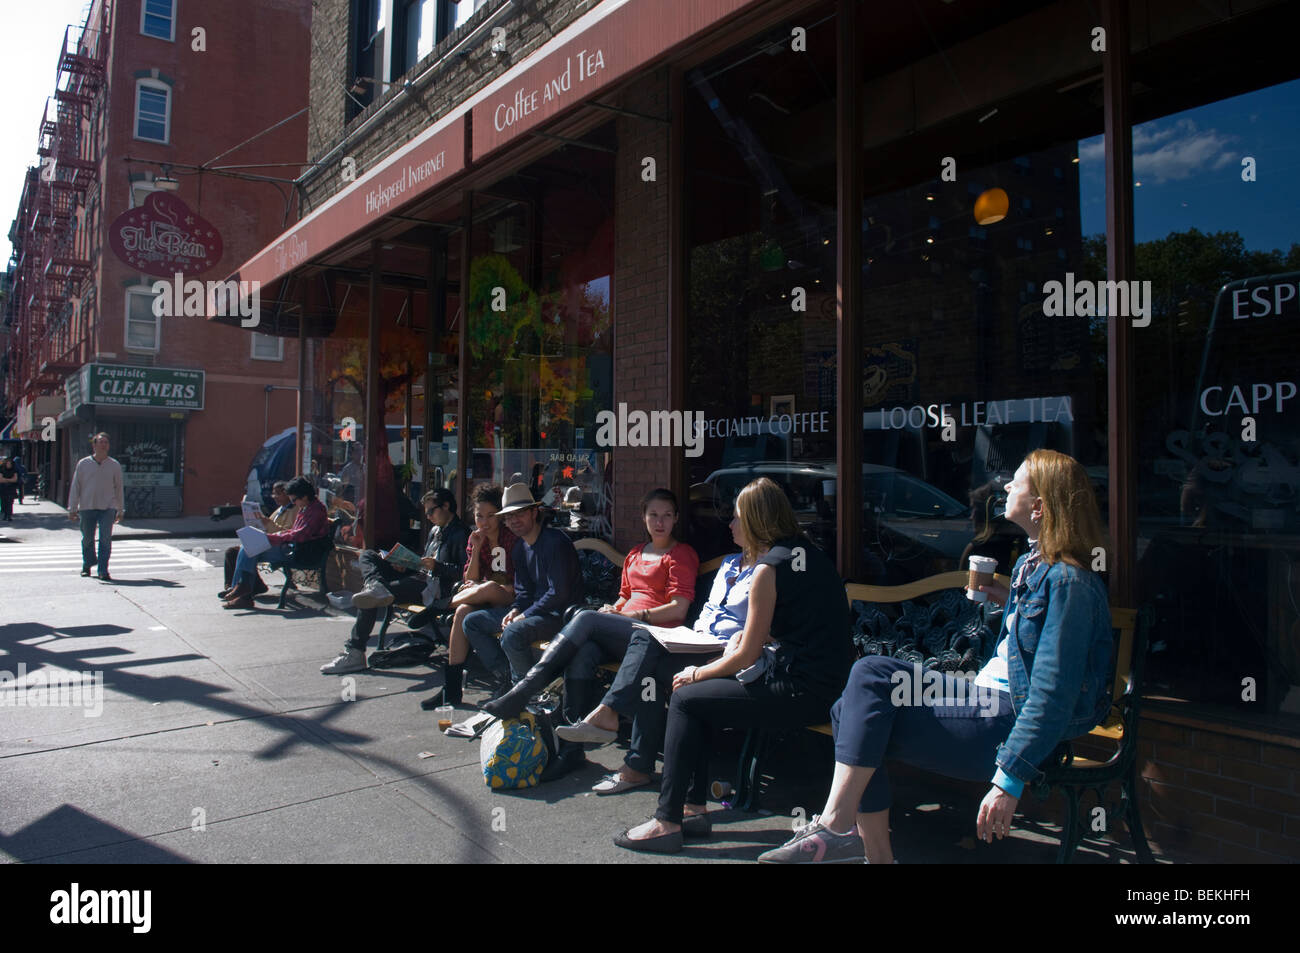 The Bean, a coffee, tea and internet cafe in the East Village neighborhood in New York Stock Photo